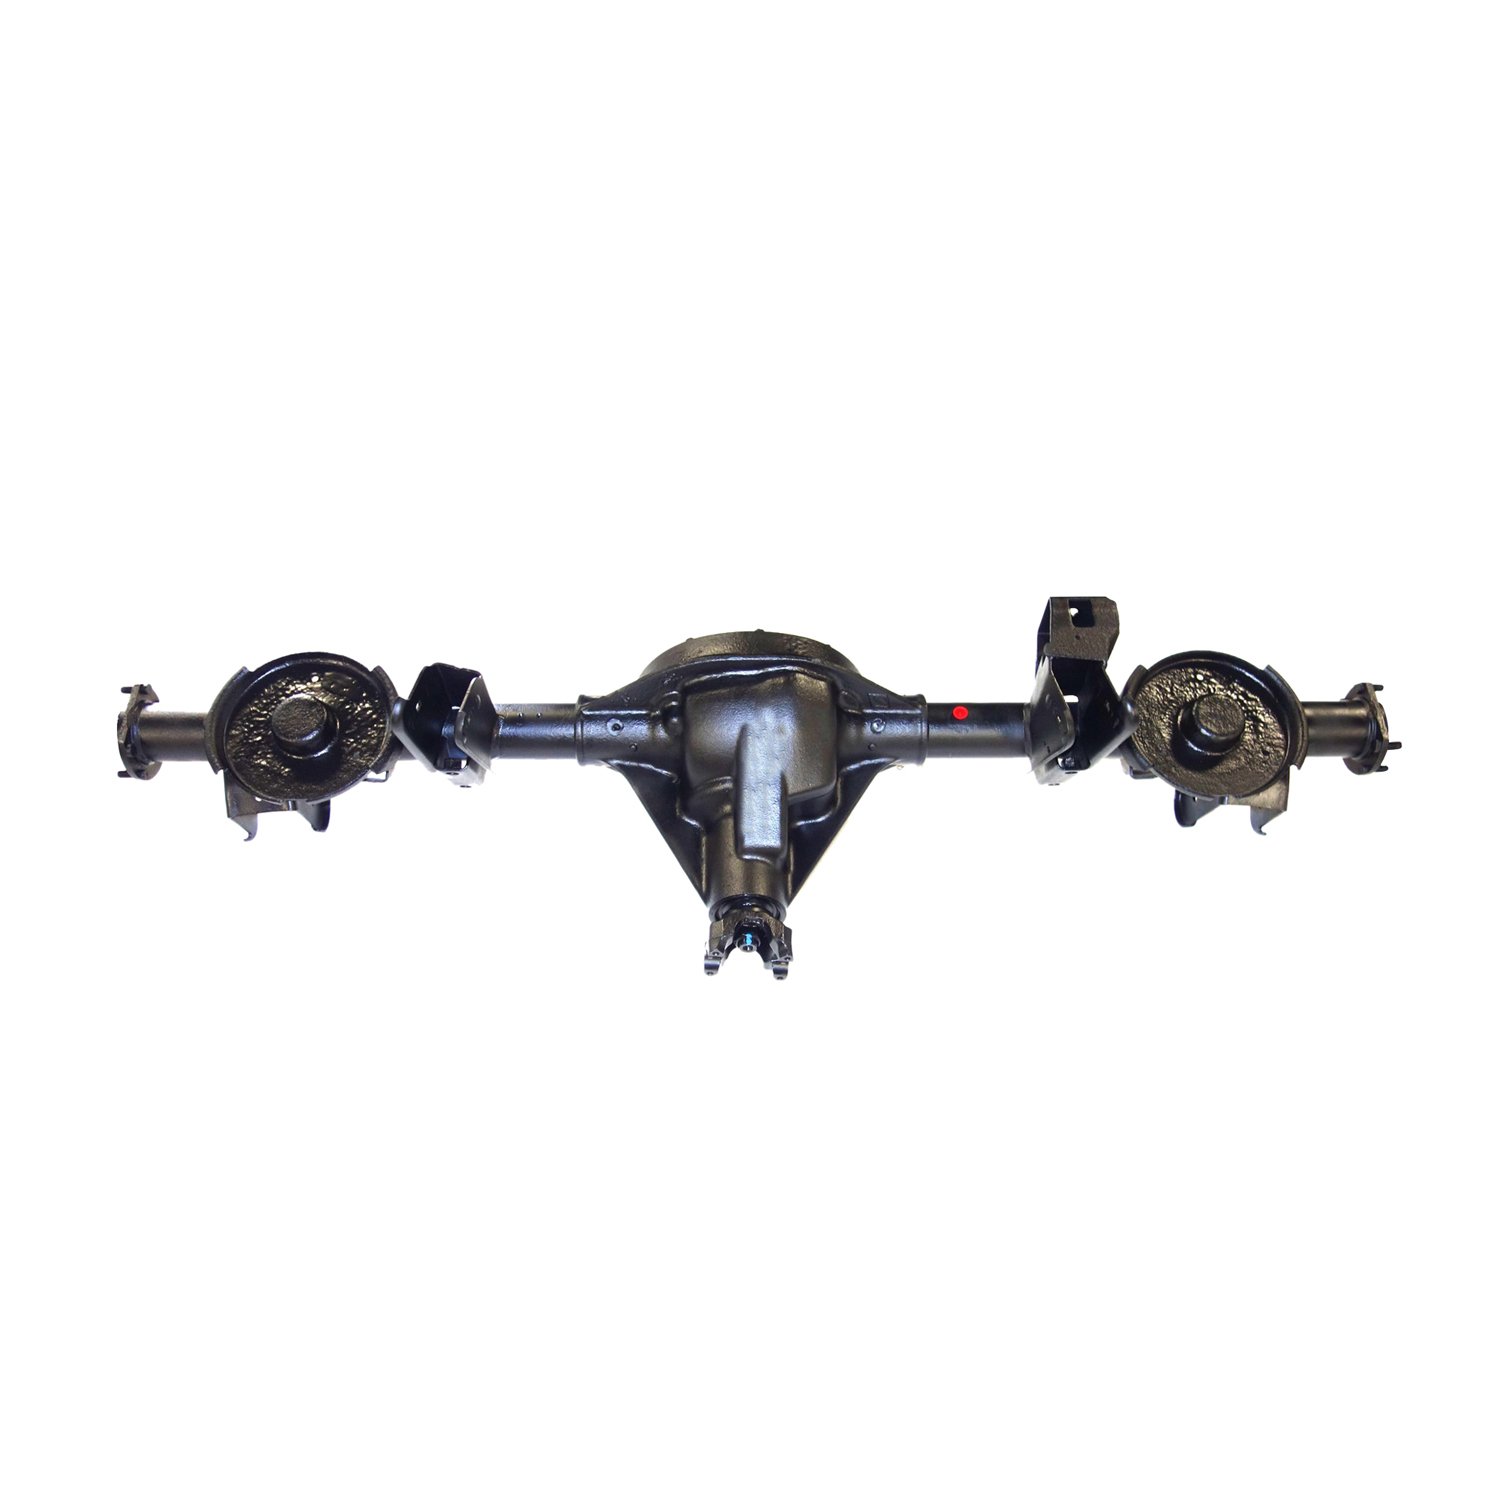 Remanufactured Complete Axle Assy for Dana 35 2002 Liberty 3.73 , 3.7l w/o ABS, Posi LSD